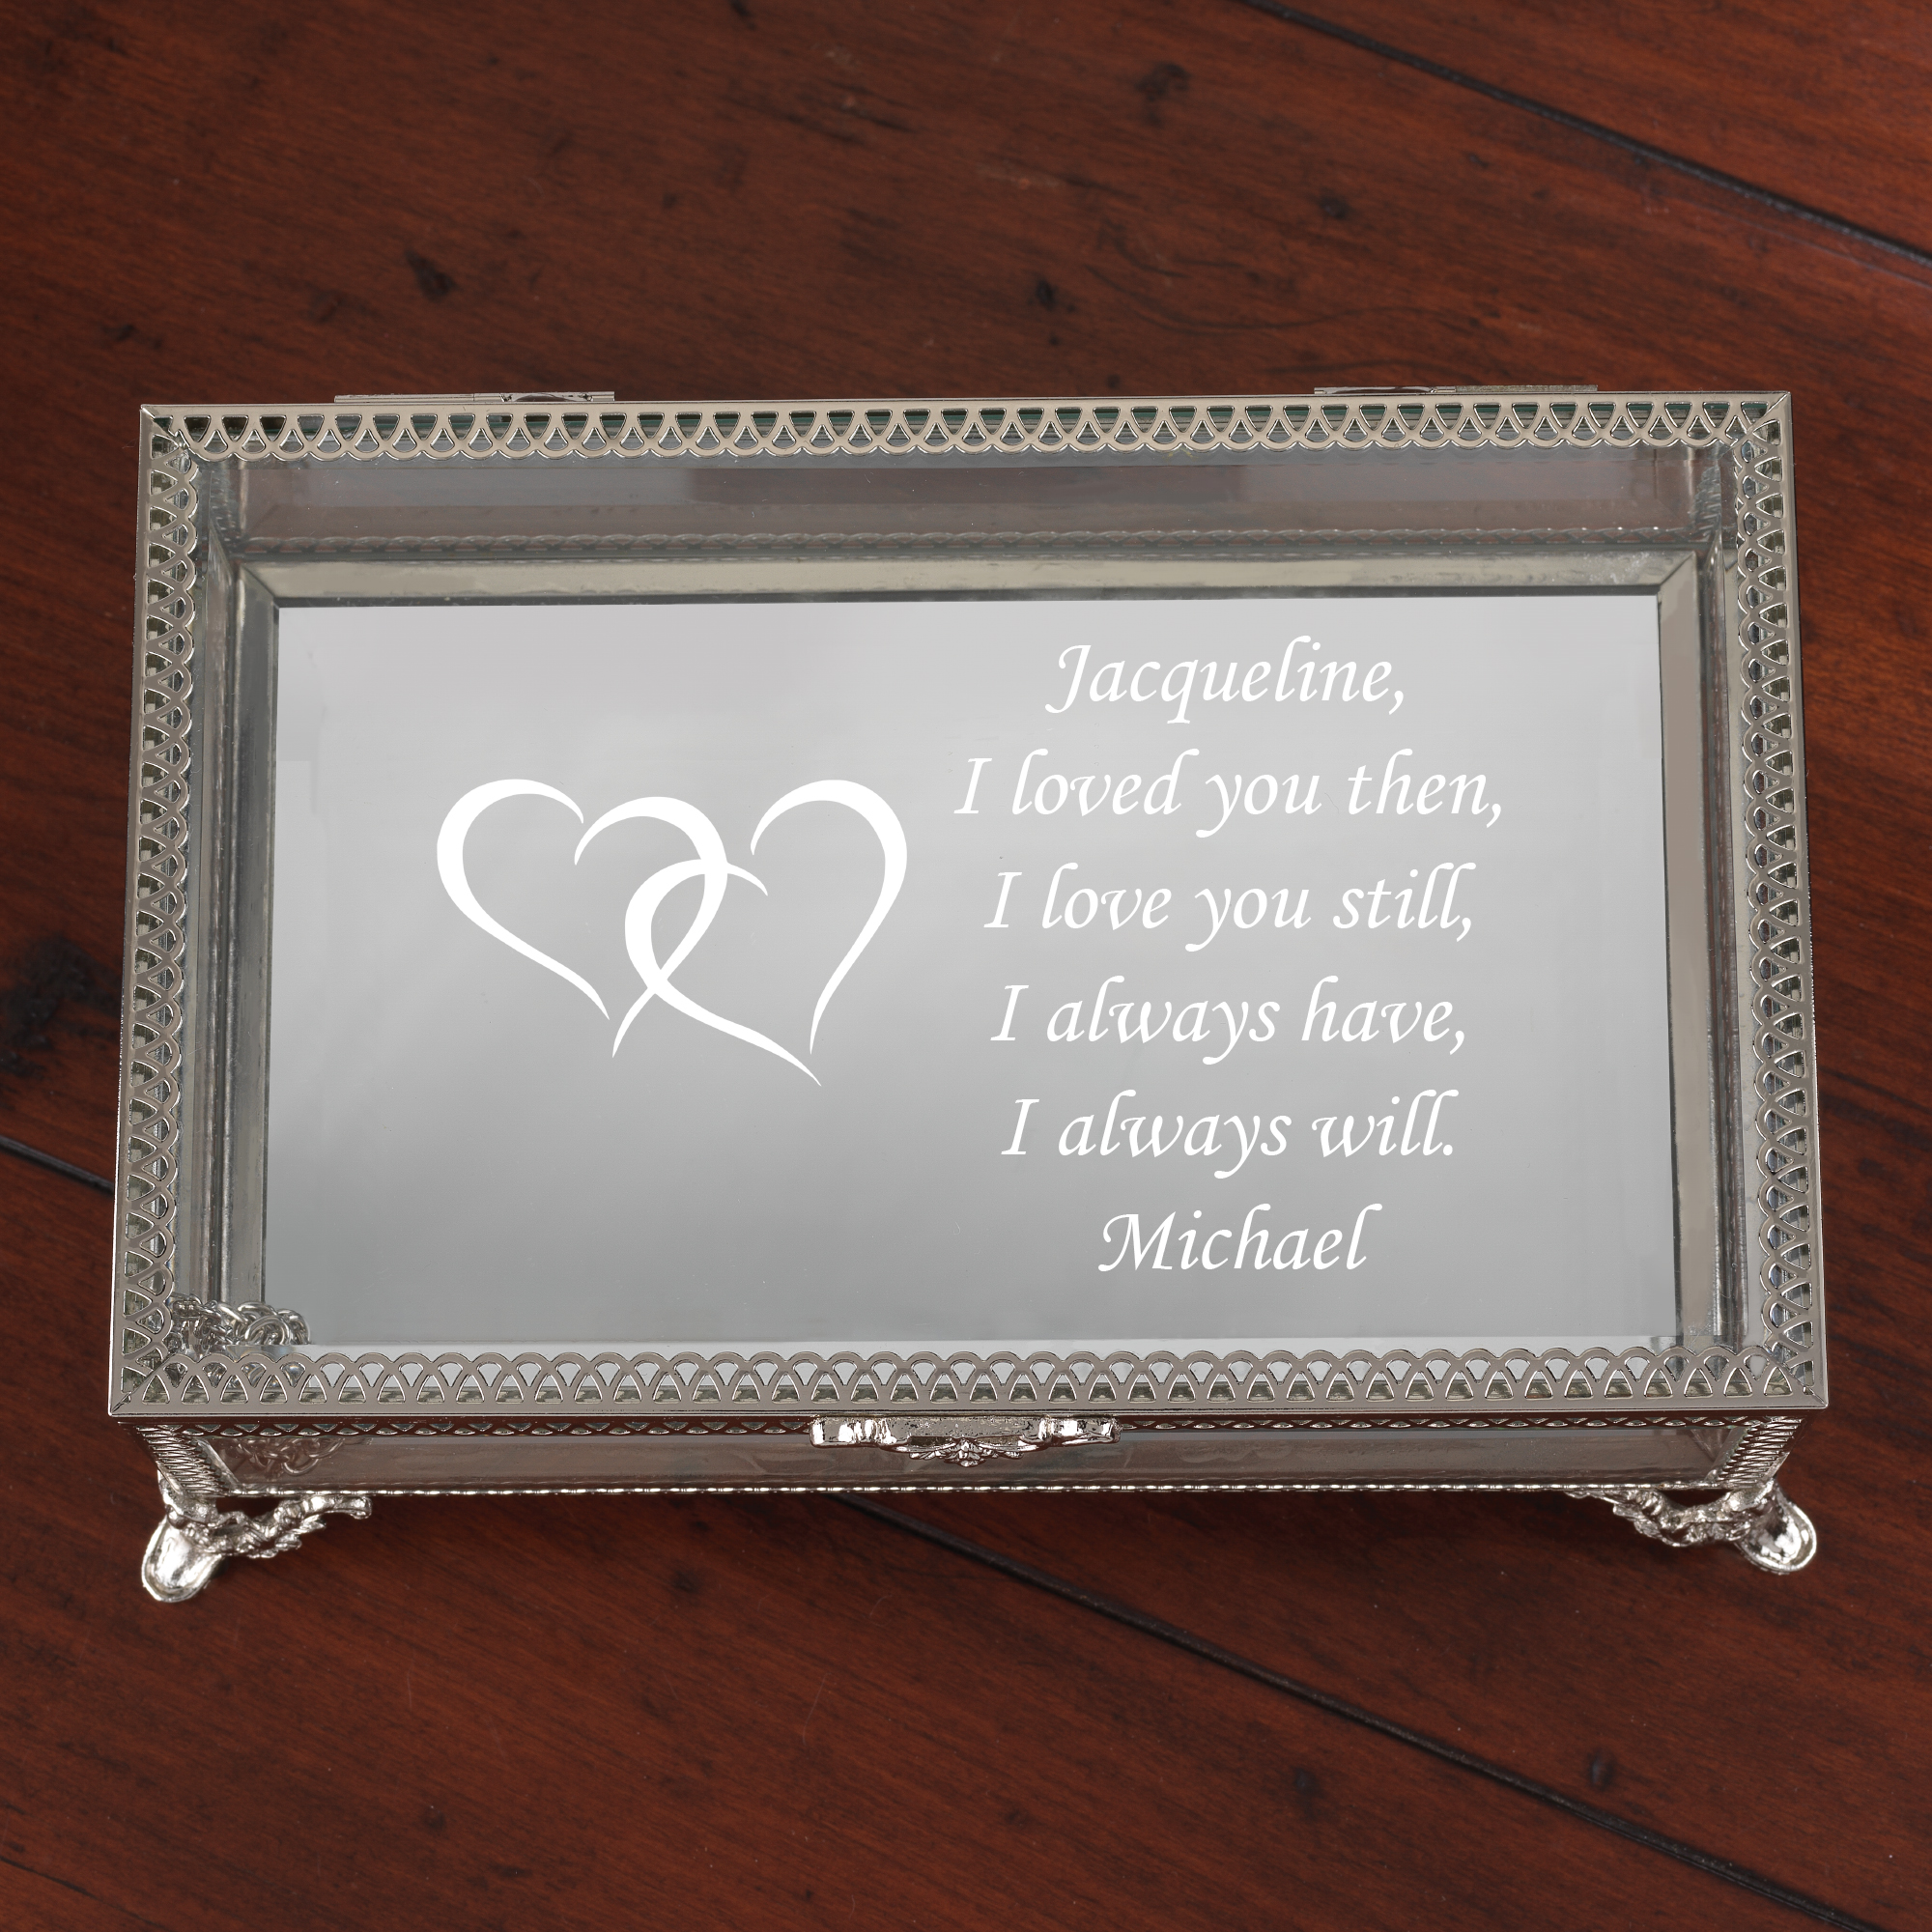 The Personalized I Love You Jewelry Box 10745 0017 a main